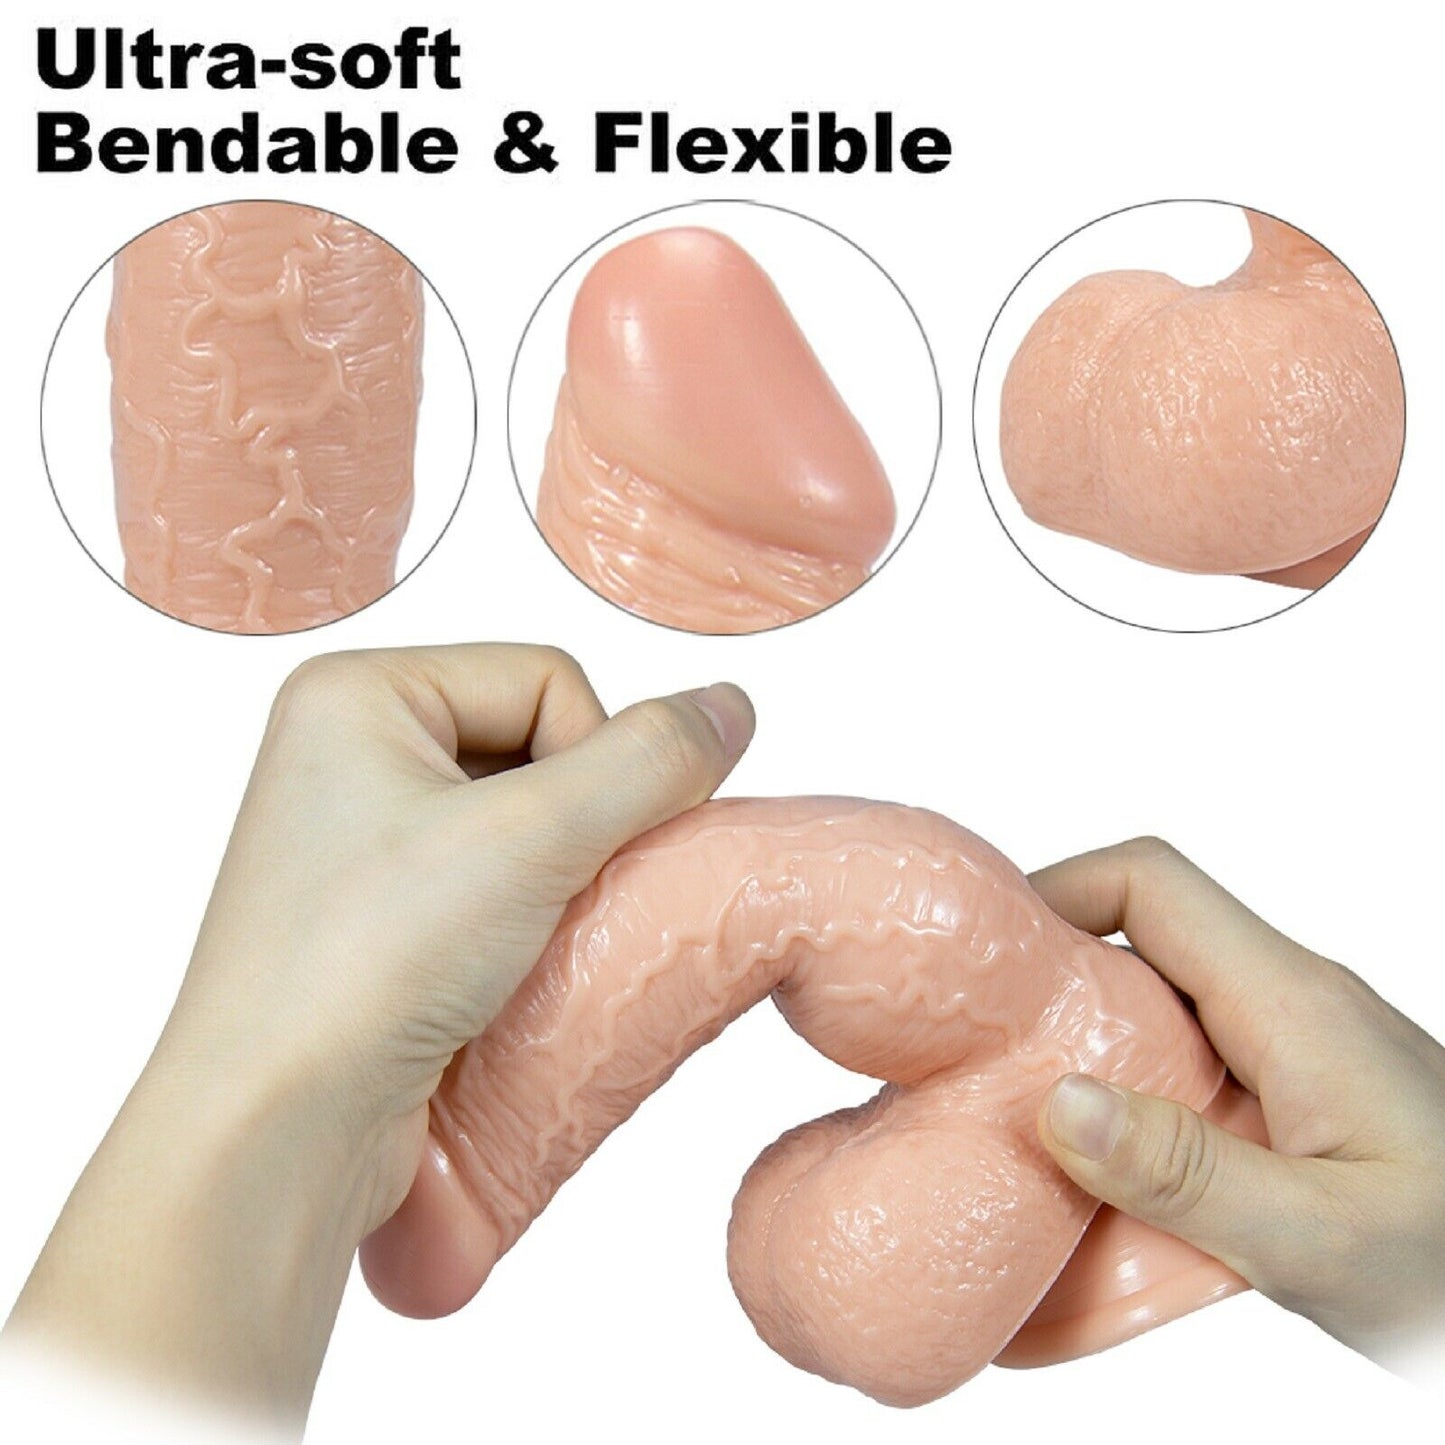 8.2" Realistic Dildo Dong Fantasy Monster FAT MASSIVE Anal BDSM Adult Sex Toy